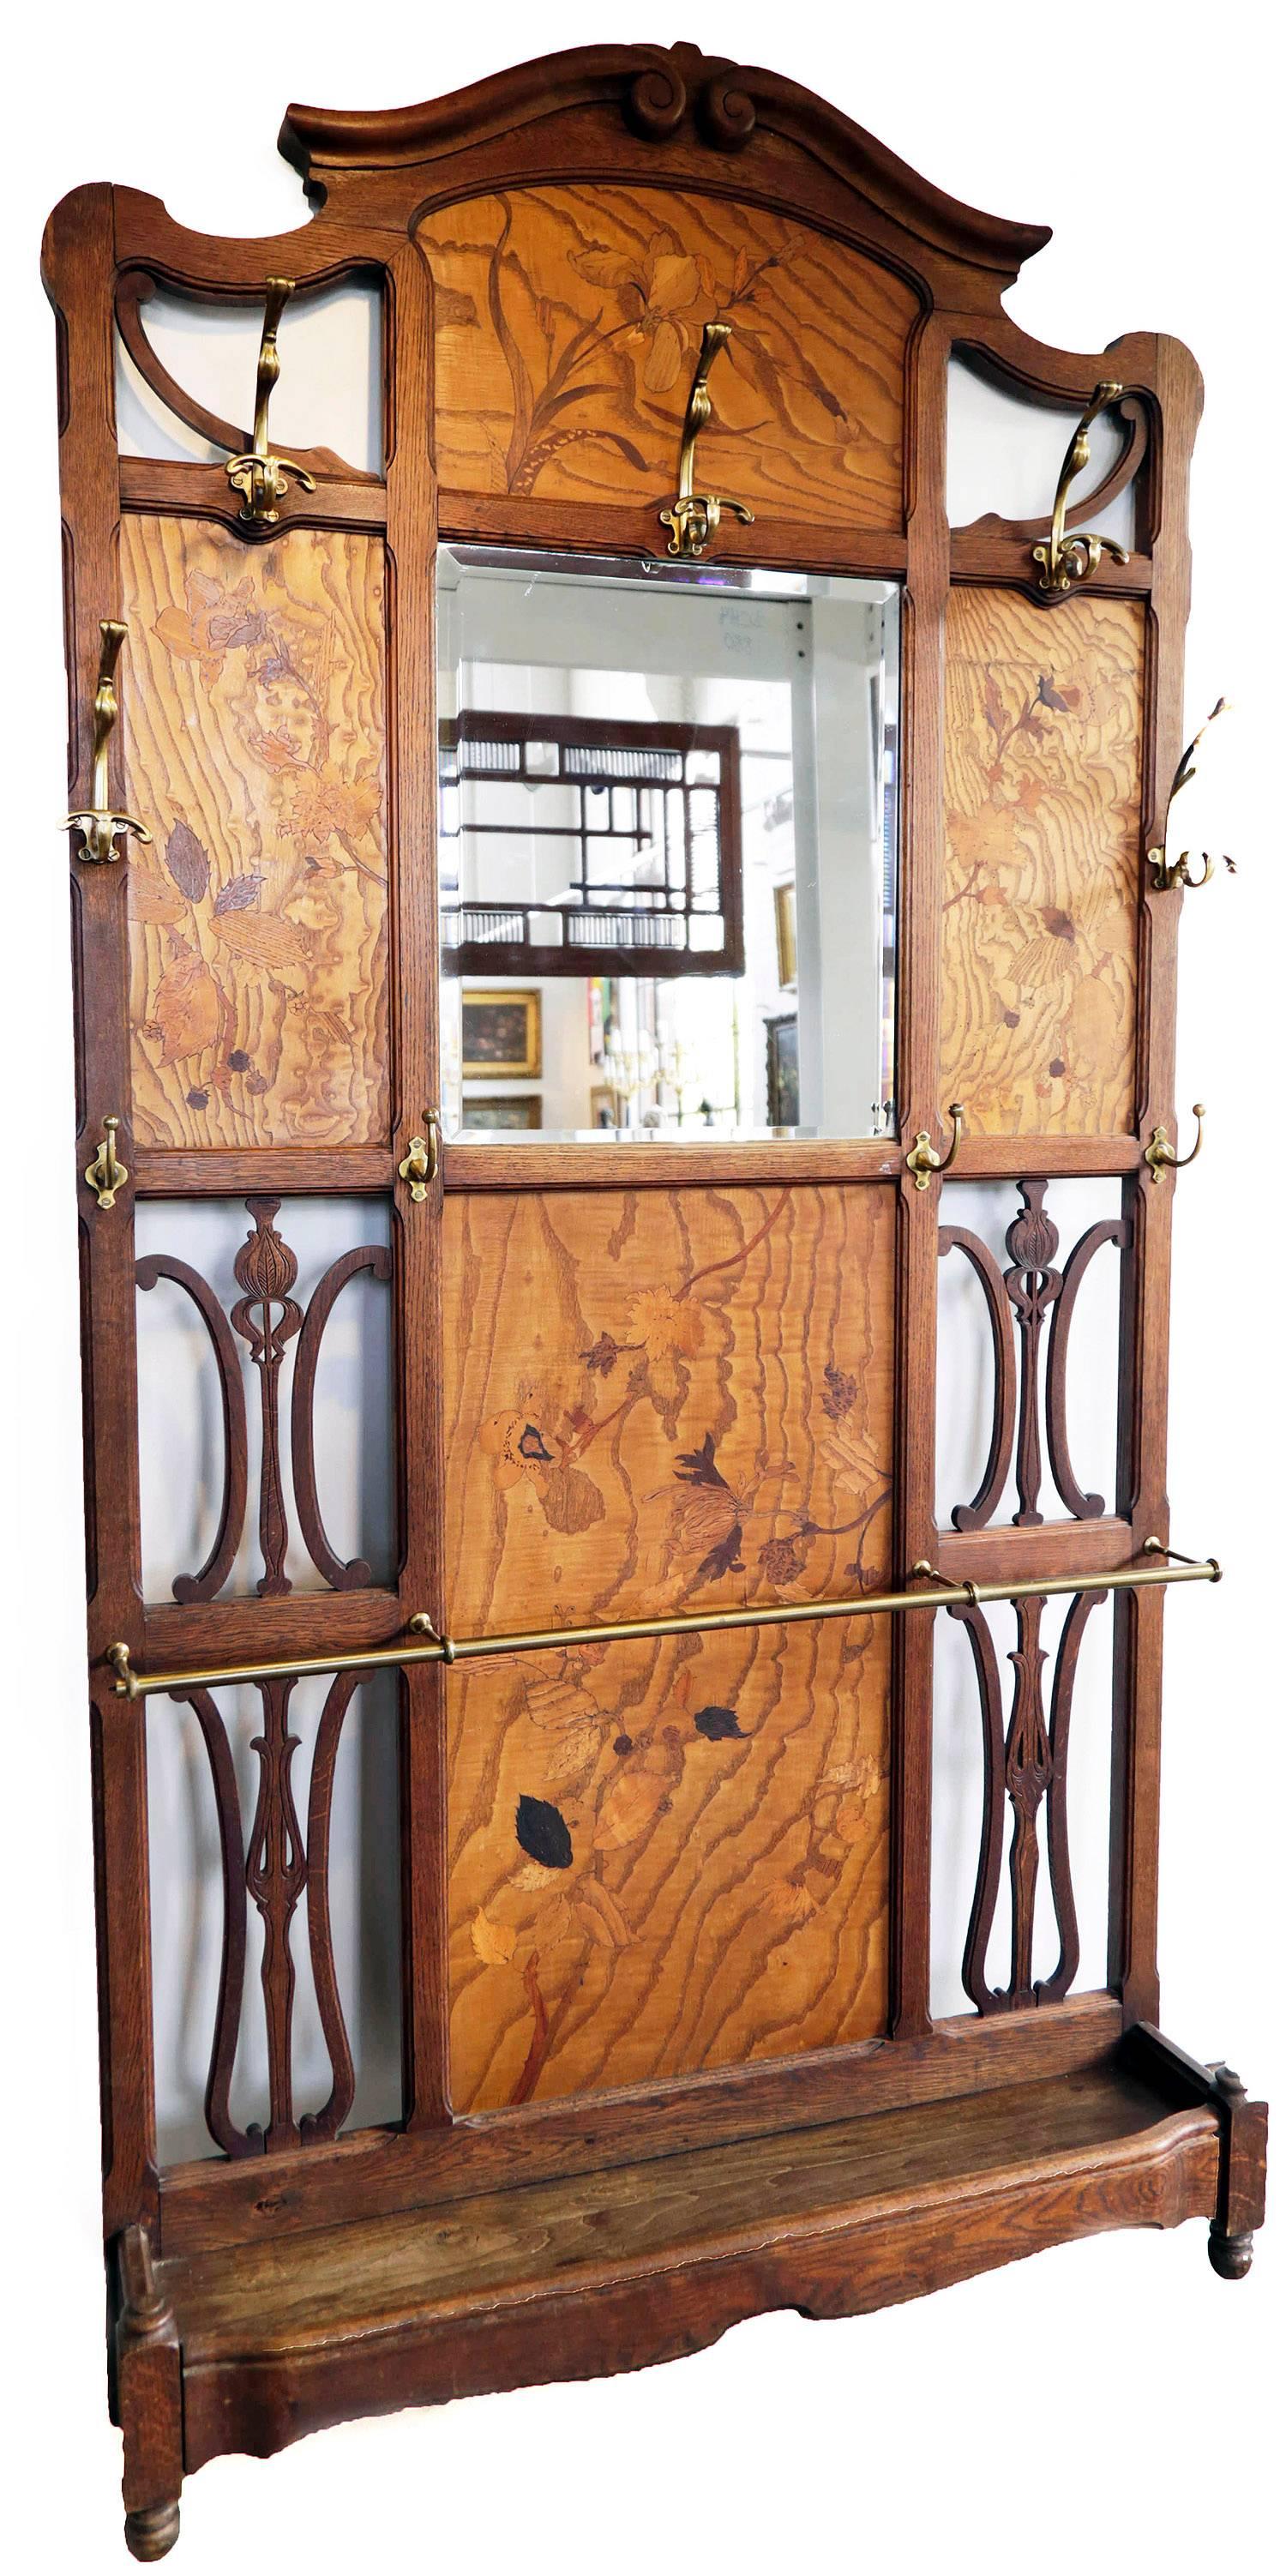 19th century French Art Nouveau hall tree
tripart form with mirror in center, with four wood panels inlaid with leaf and floral forms.